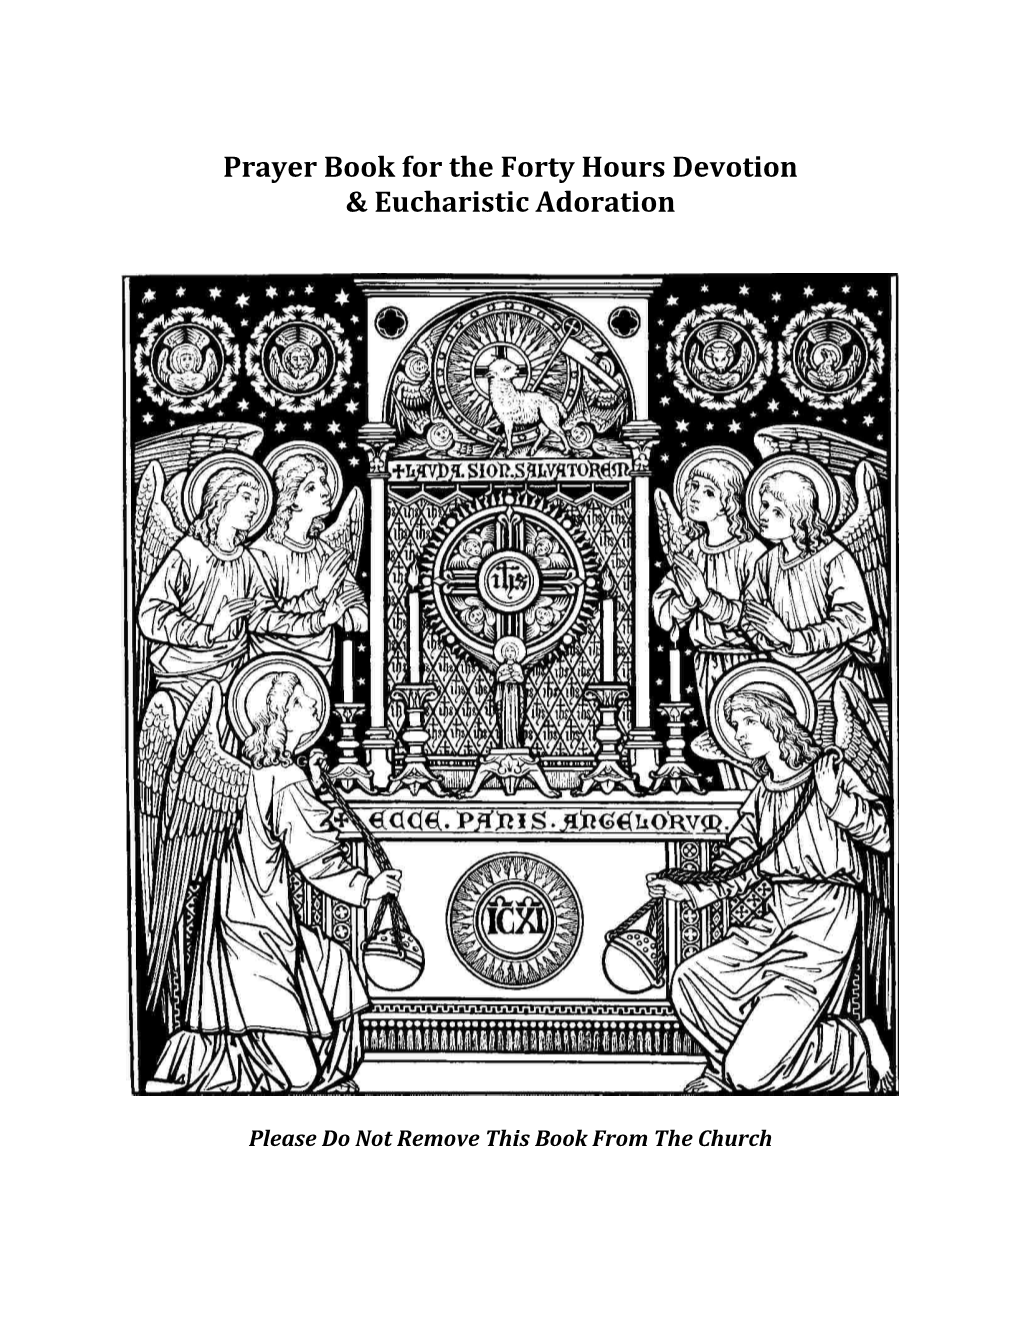 Prayer Book for the Forty Hours Devotion & Eucharistic Adoration